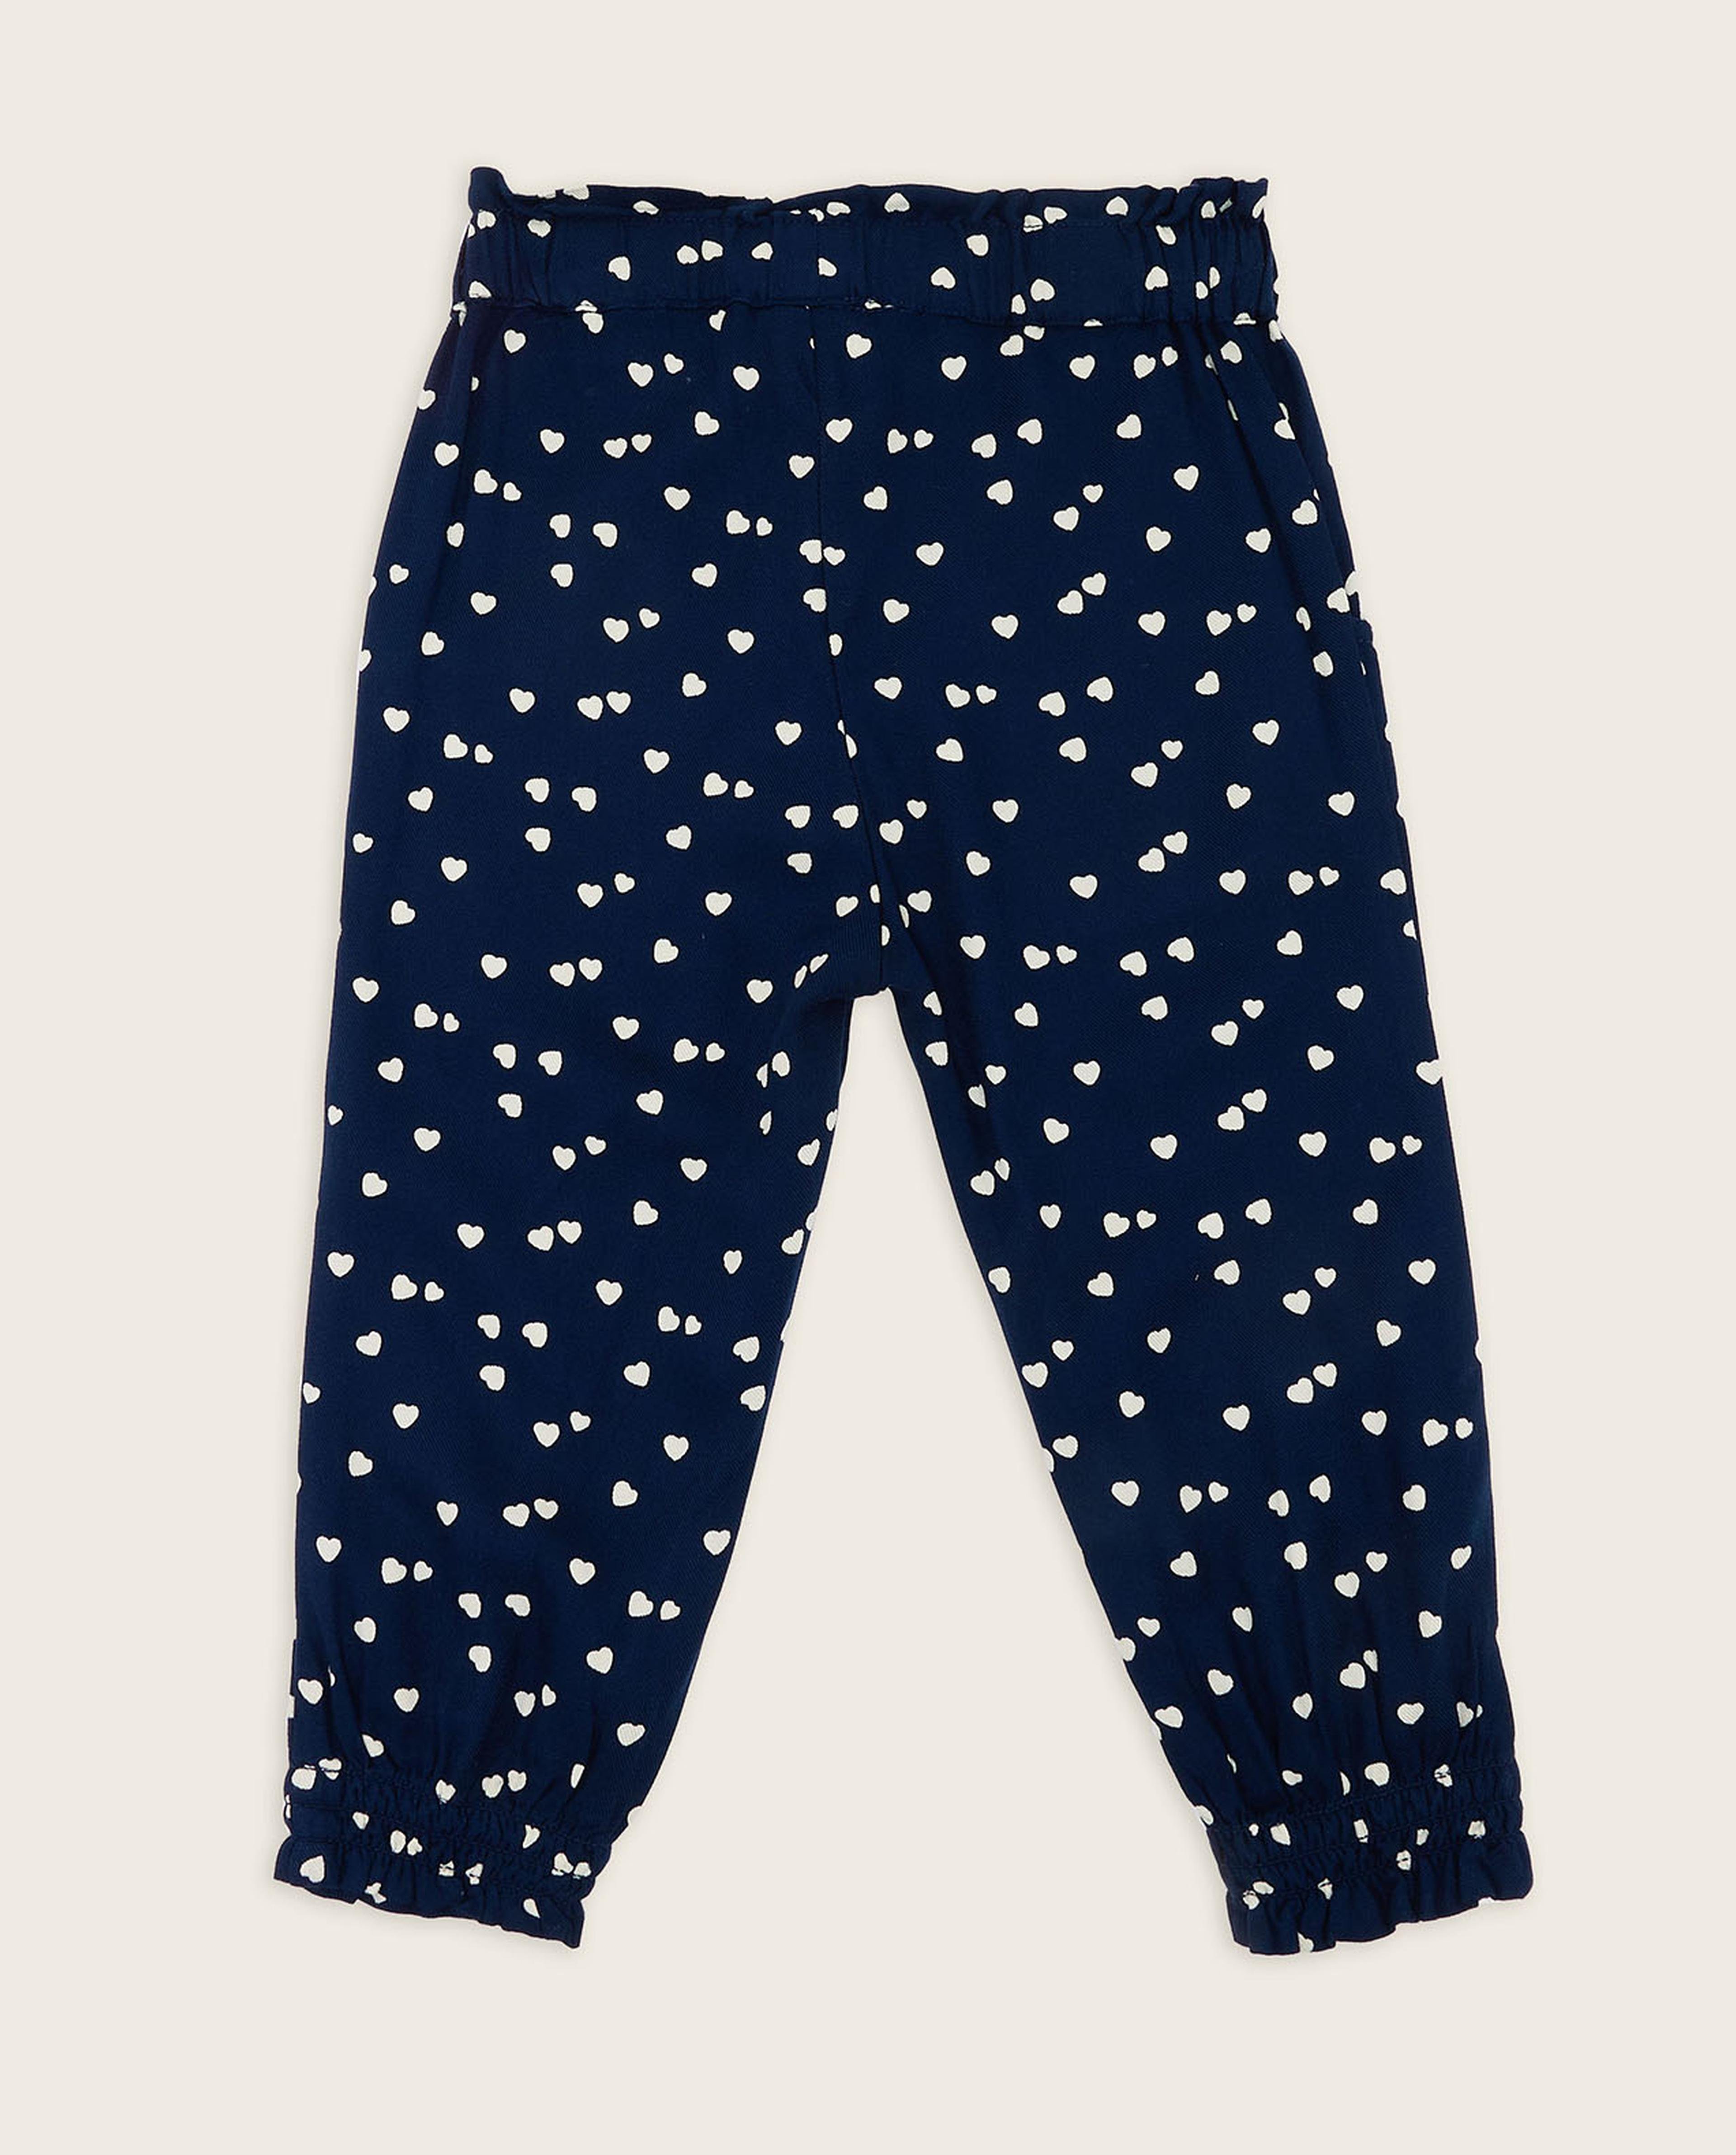 Heart Patterned Pants with Elastic Waist